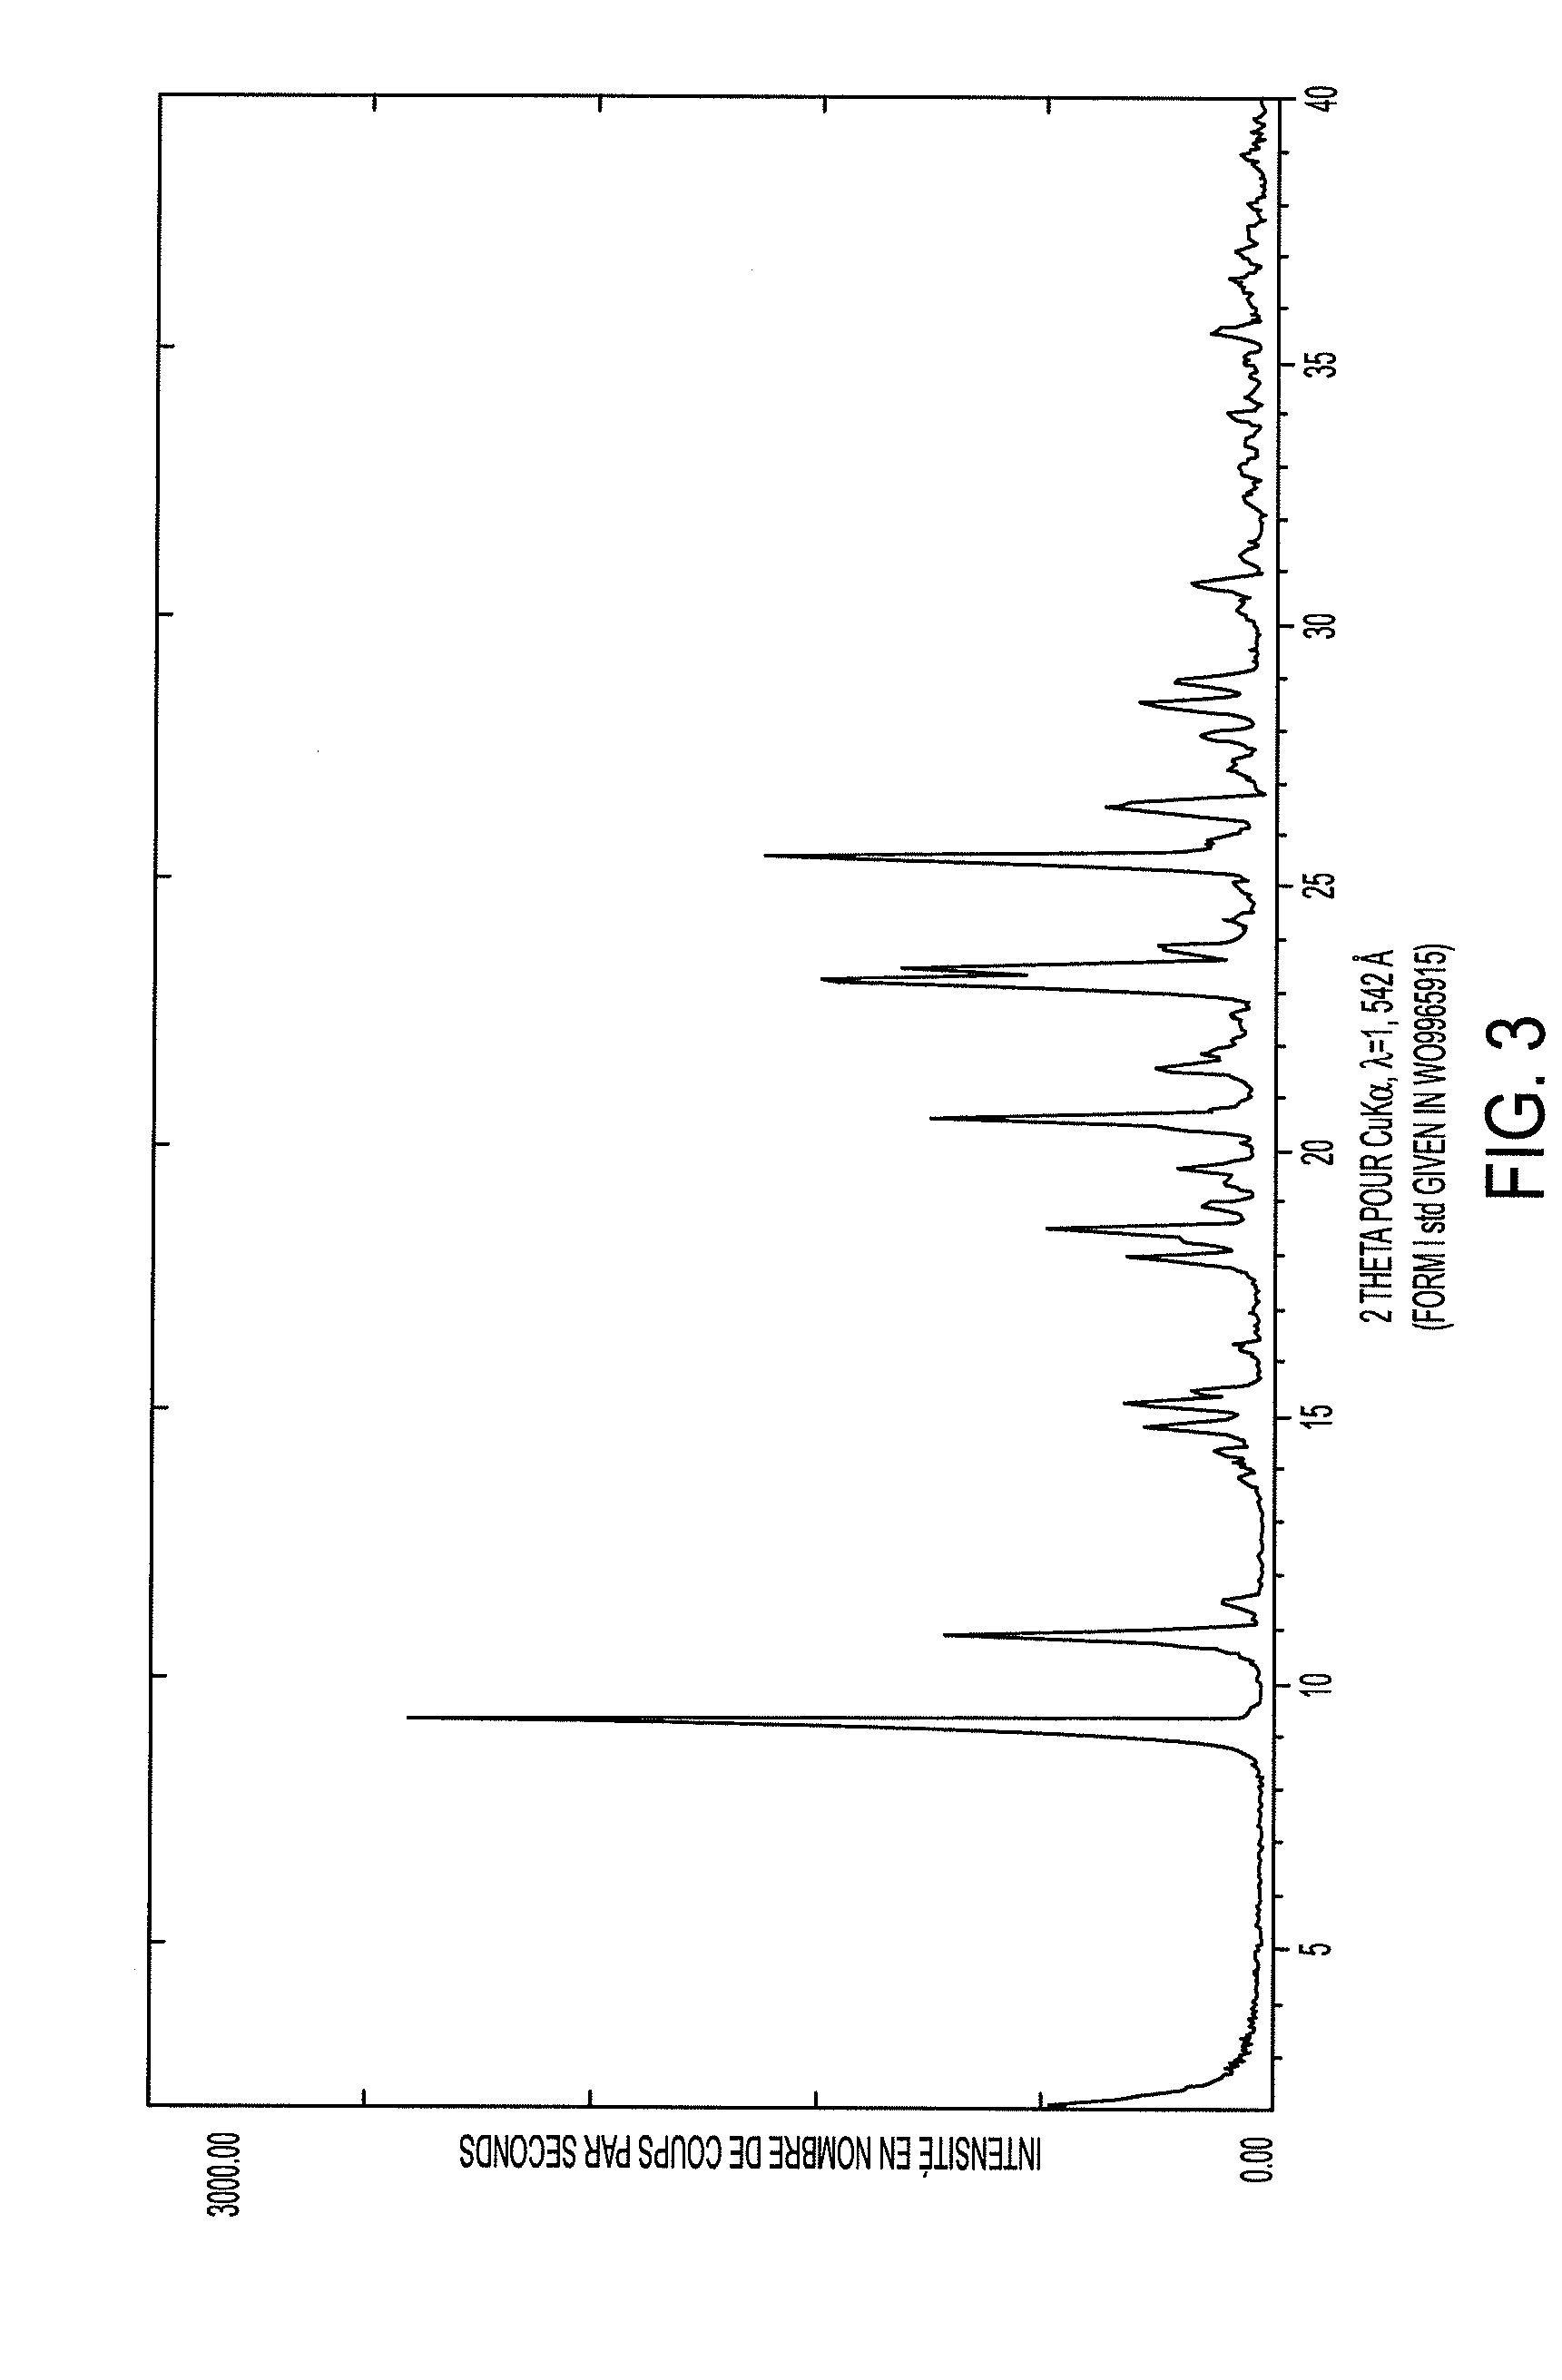 Process for preparation of crystalline clopidogrel hydrogen sulphate form i